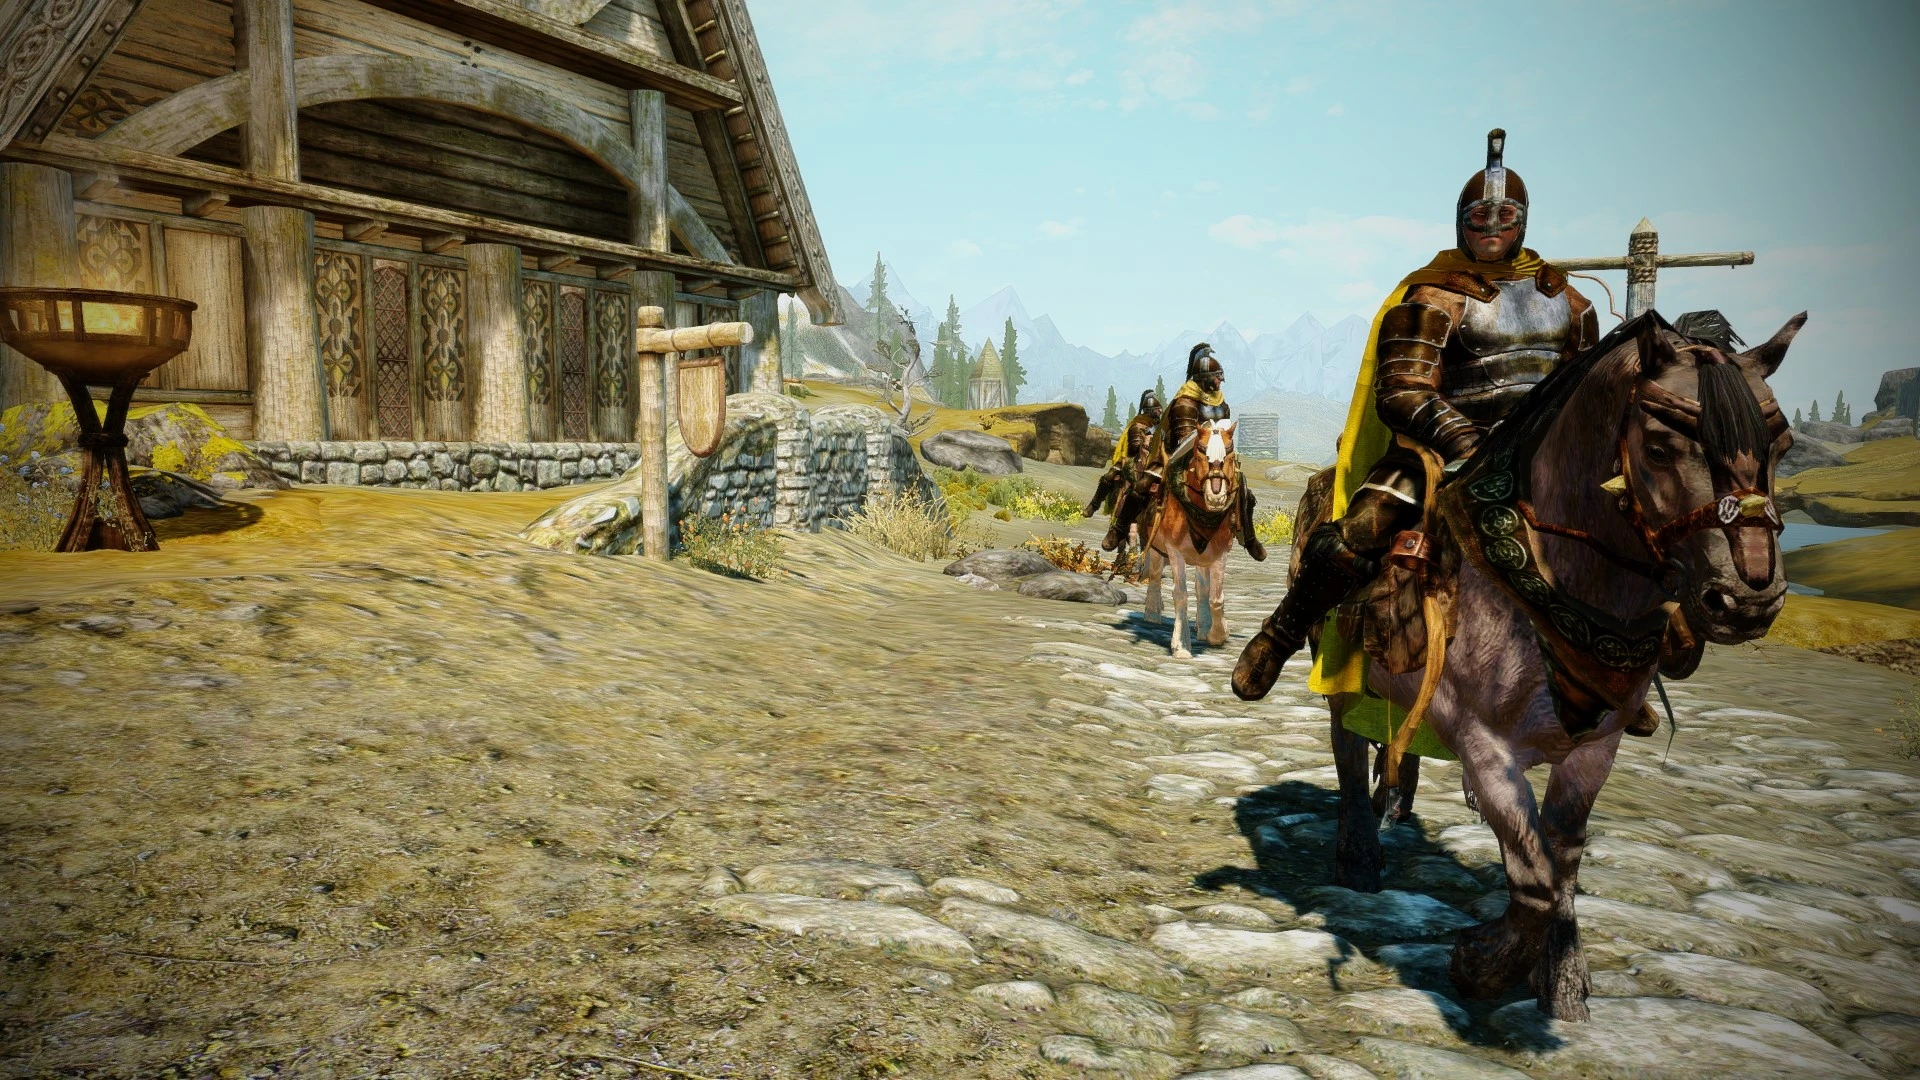 Guards Armor Replacer and Horses On Patrol - Vanilla.